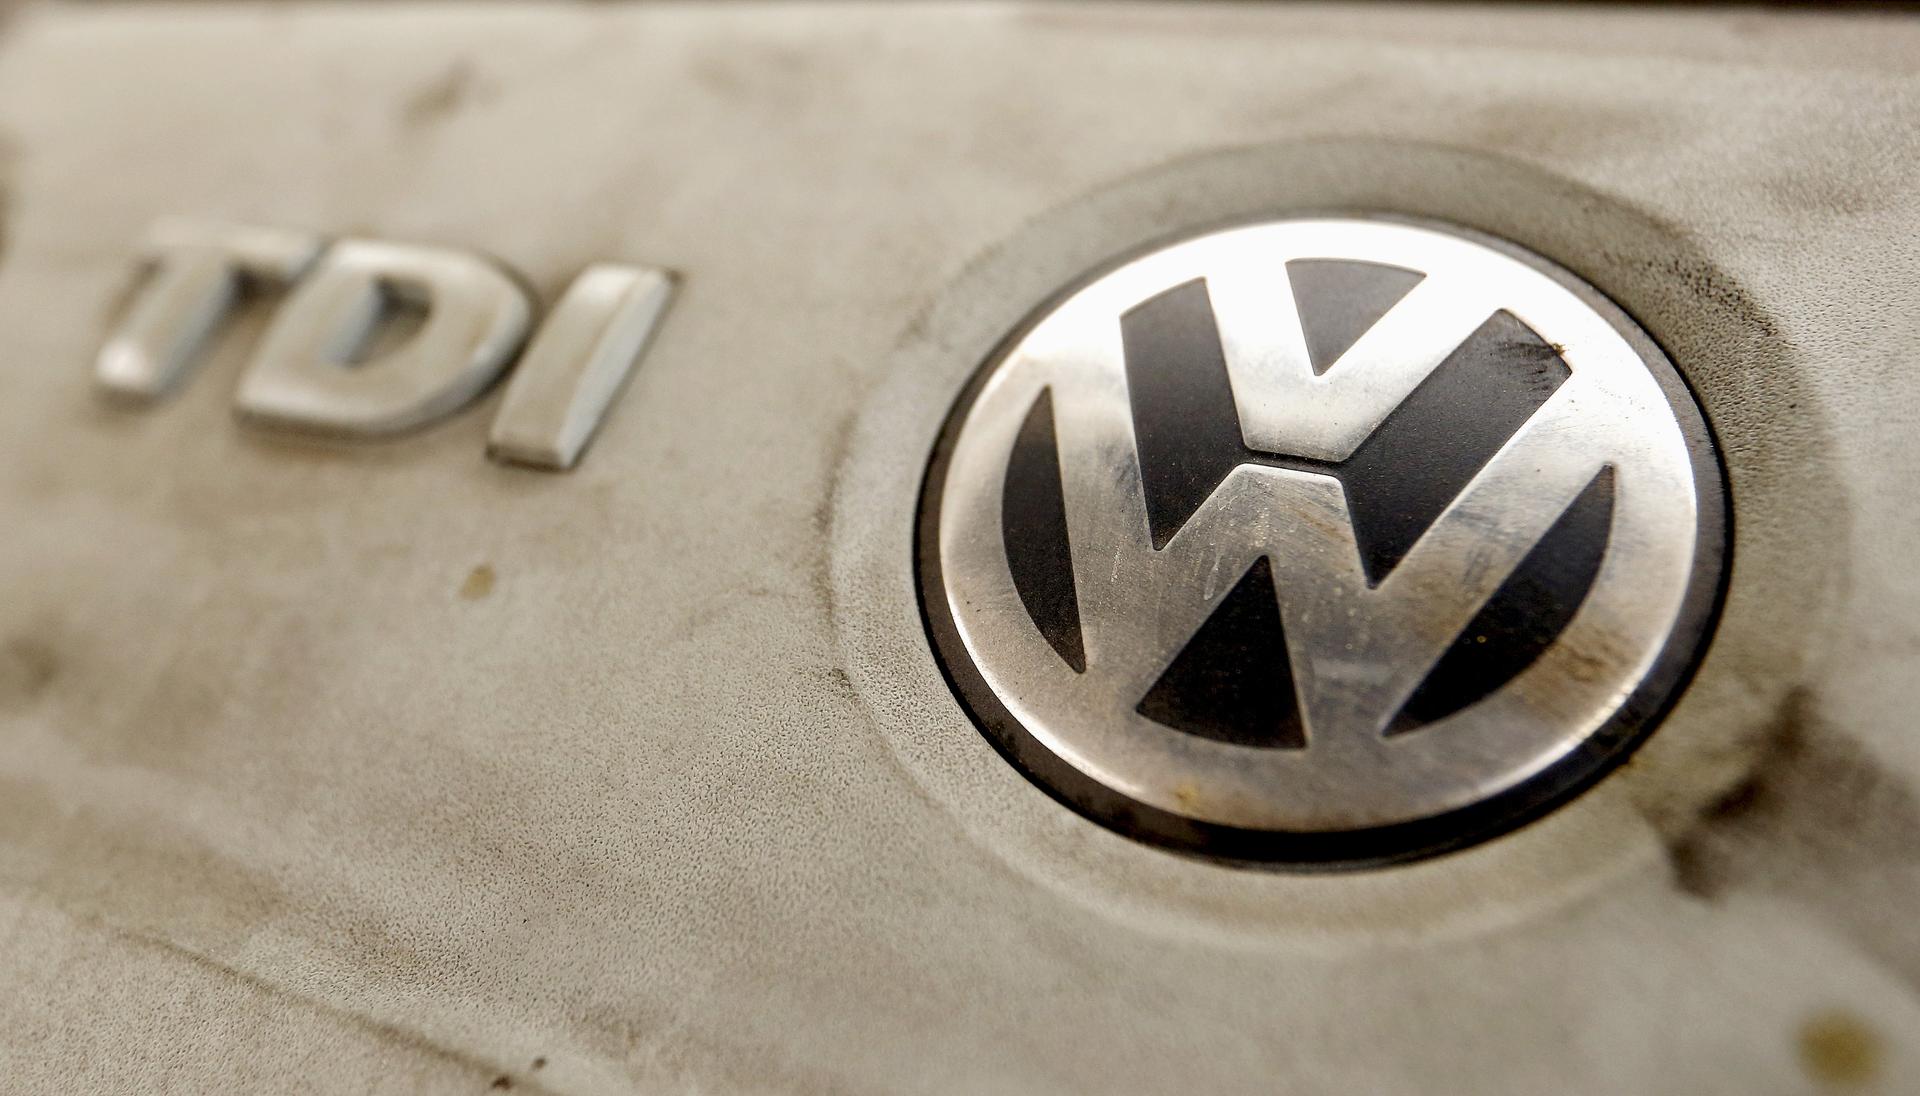 A US Volkswagen executive has admitted that his company ‘totally screwed up’ by rigging the emission test results of around 11 million of its vehicles worldwide (REUTERS/Arnd Wiegmann).